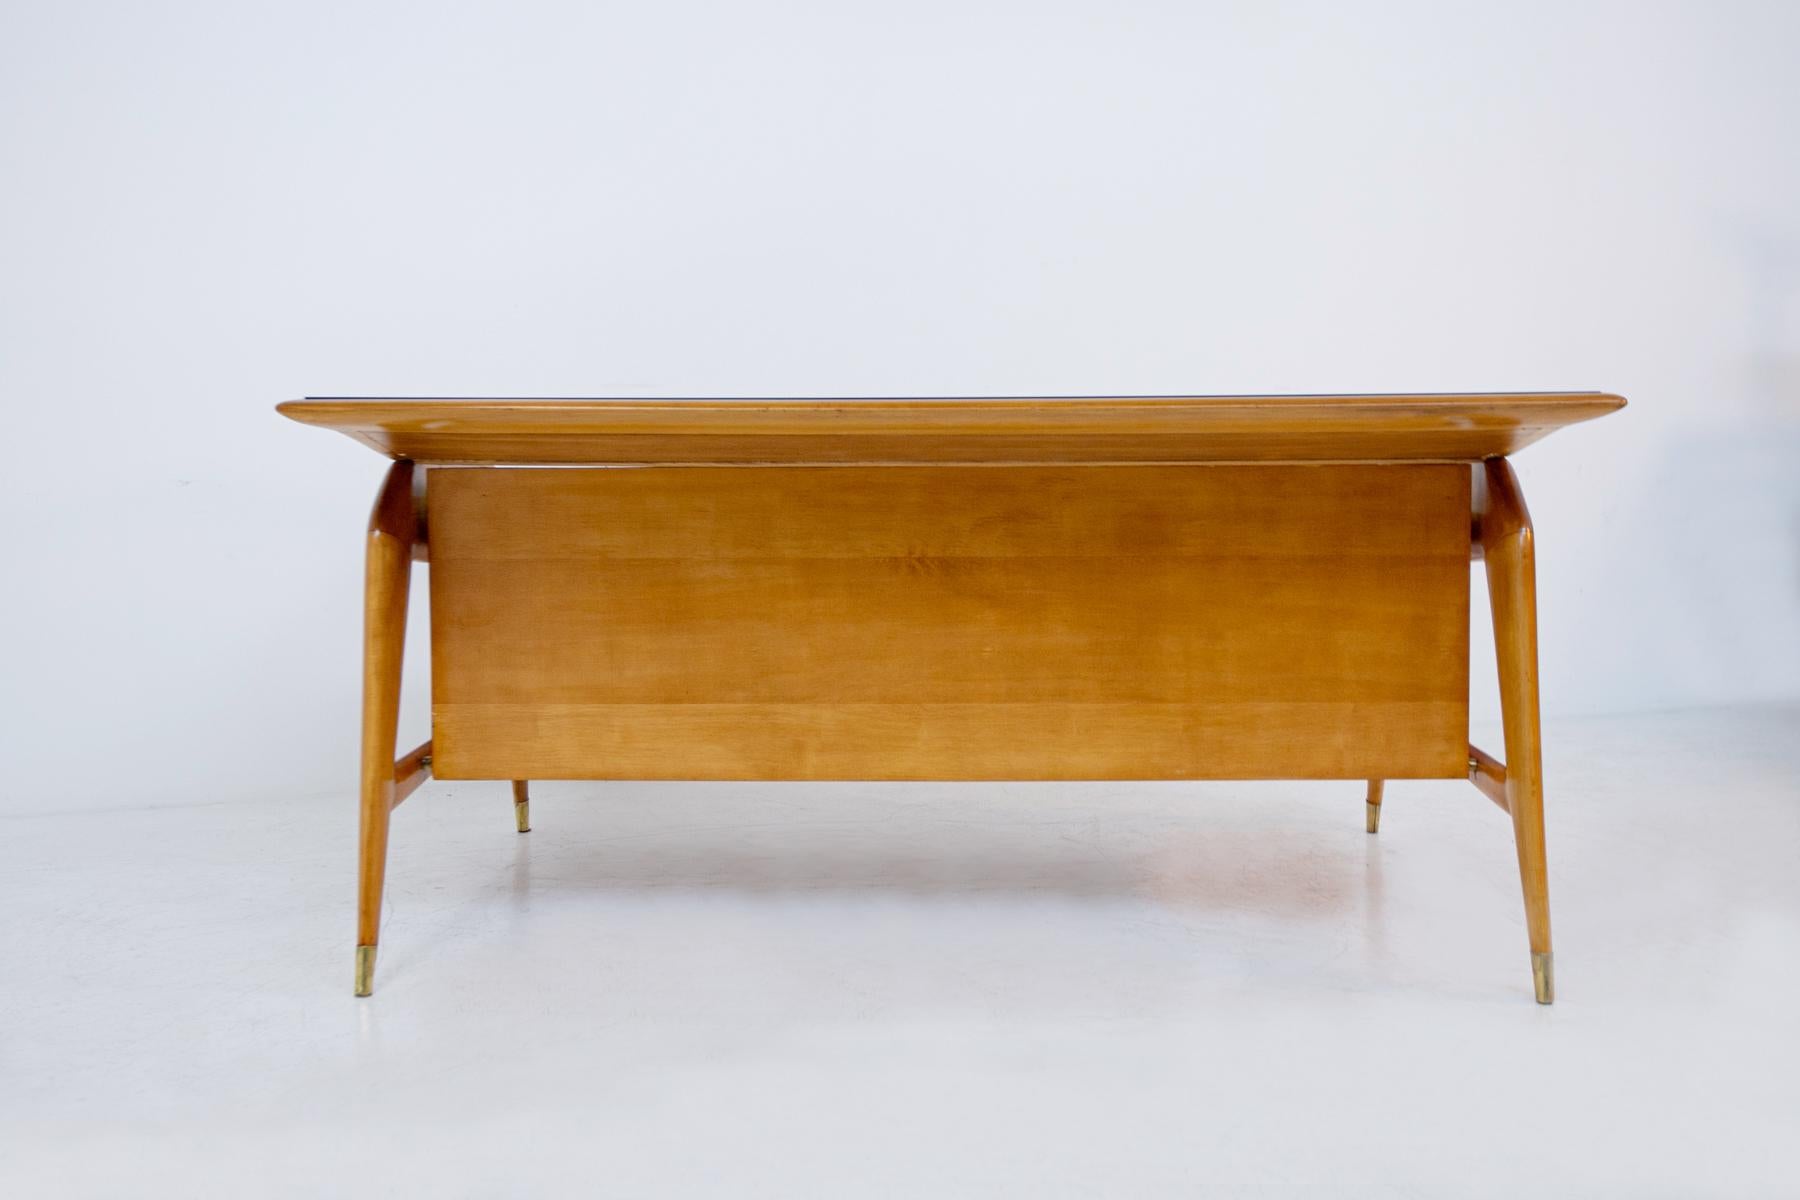 Carlo de Carli Important Desk in Wood Glass and Brass, 1950s Published 12